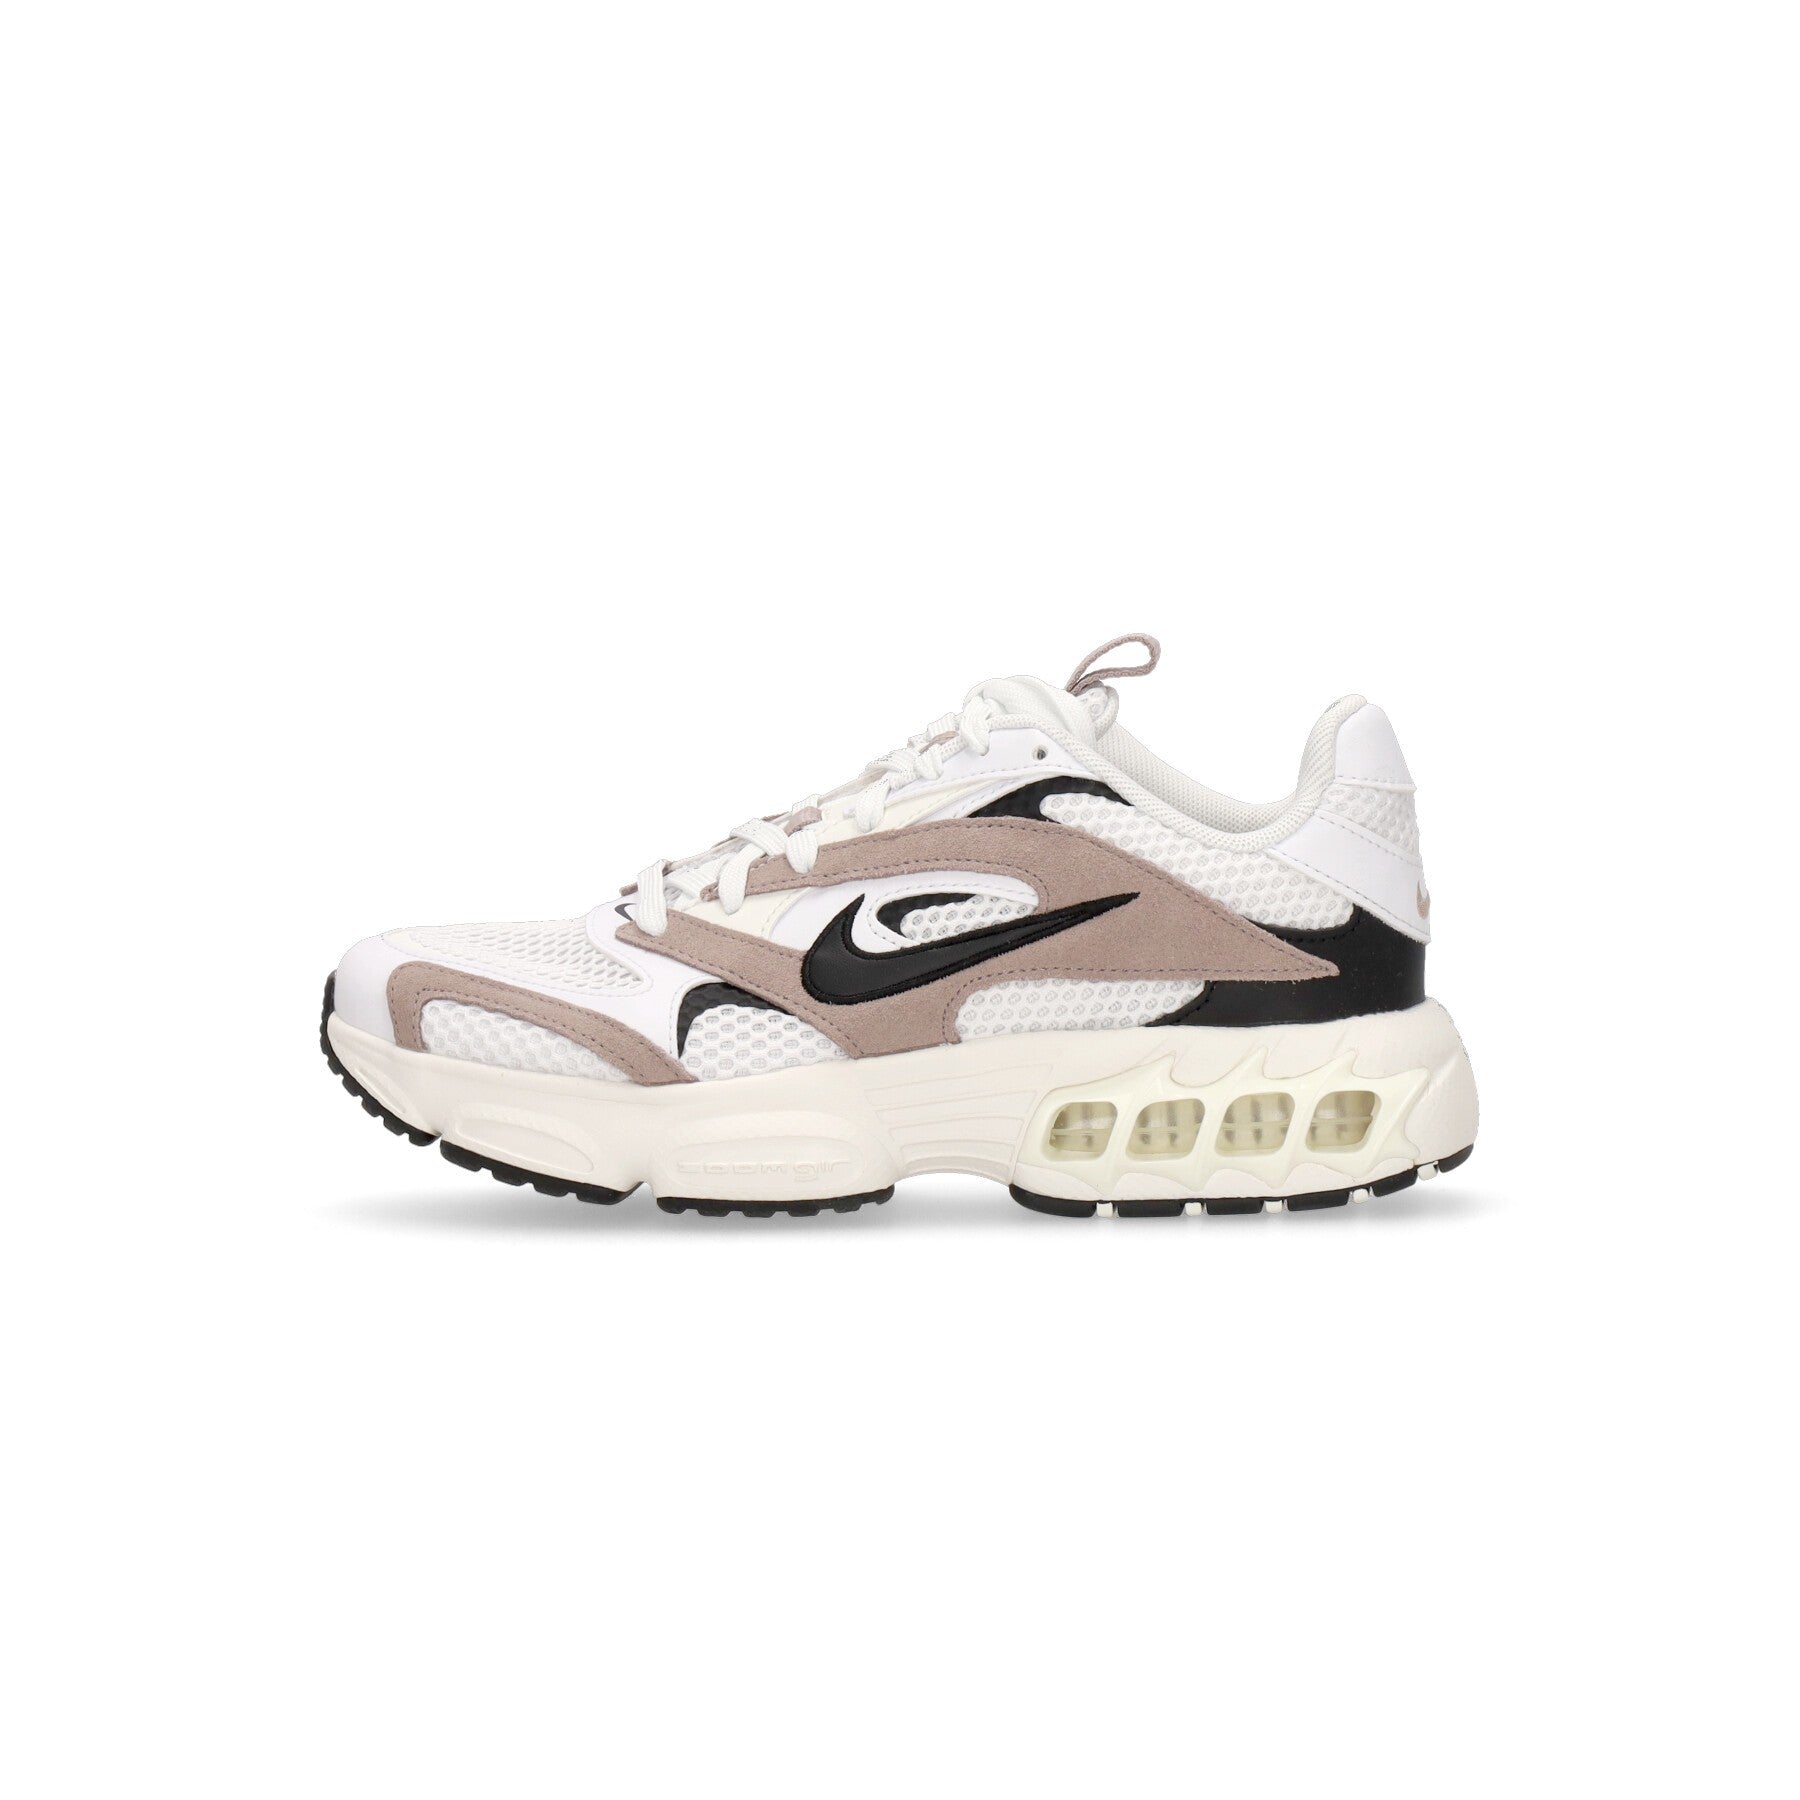 Nike, Scarpa Bassa Donna Wmns Air Zoom Fire, White/black/sail/diffused Taupe